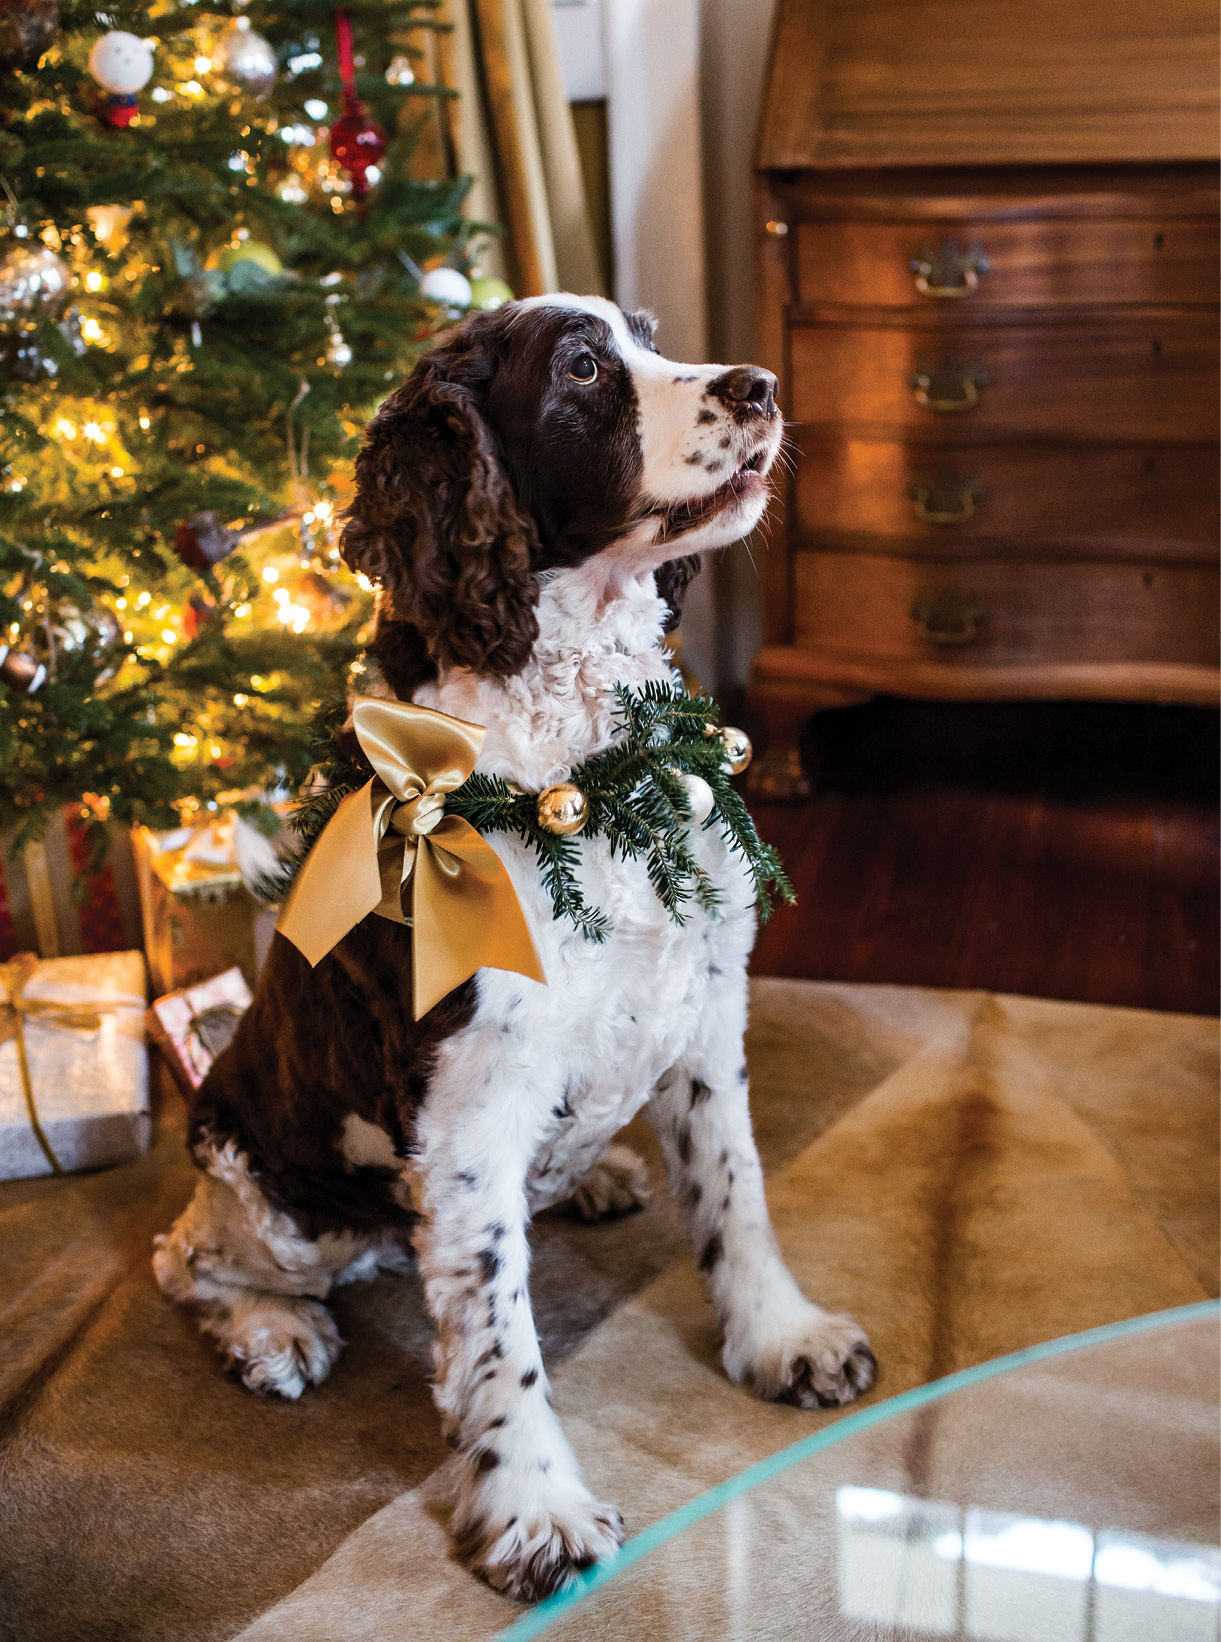 SHOP AT HOME: Georgia sports a posh collar made from choice Christmas scraps: ribbon from wrapping presents, a few “borrowed” ornaments, and sprigs from the tree.